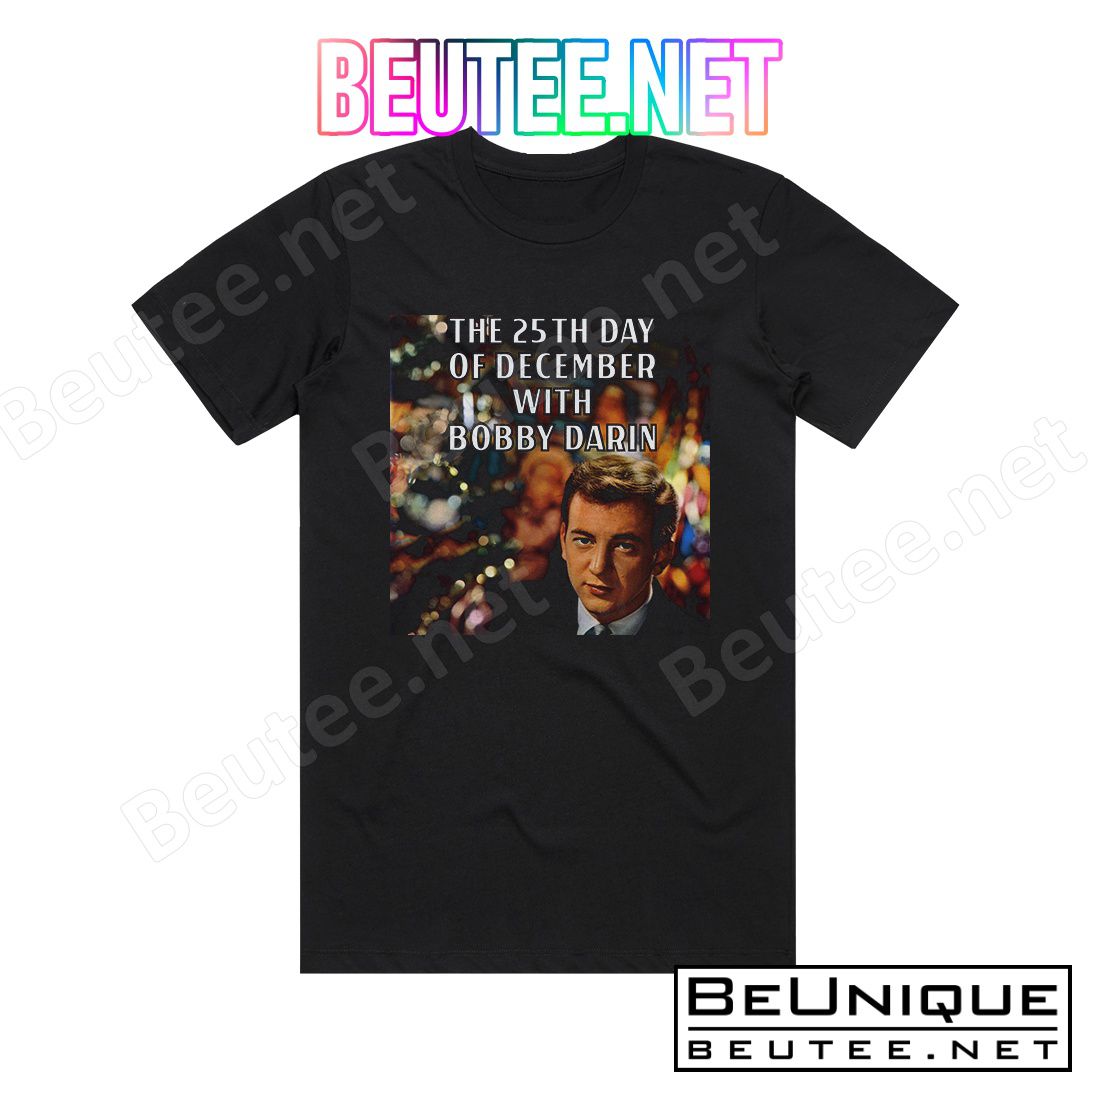 Bobby Darin The 25Th Day Of December Album Cover T-Shirt